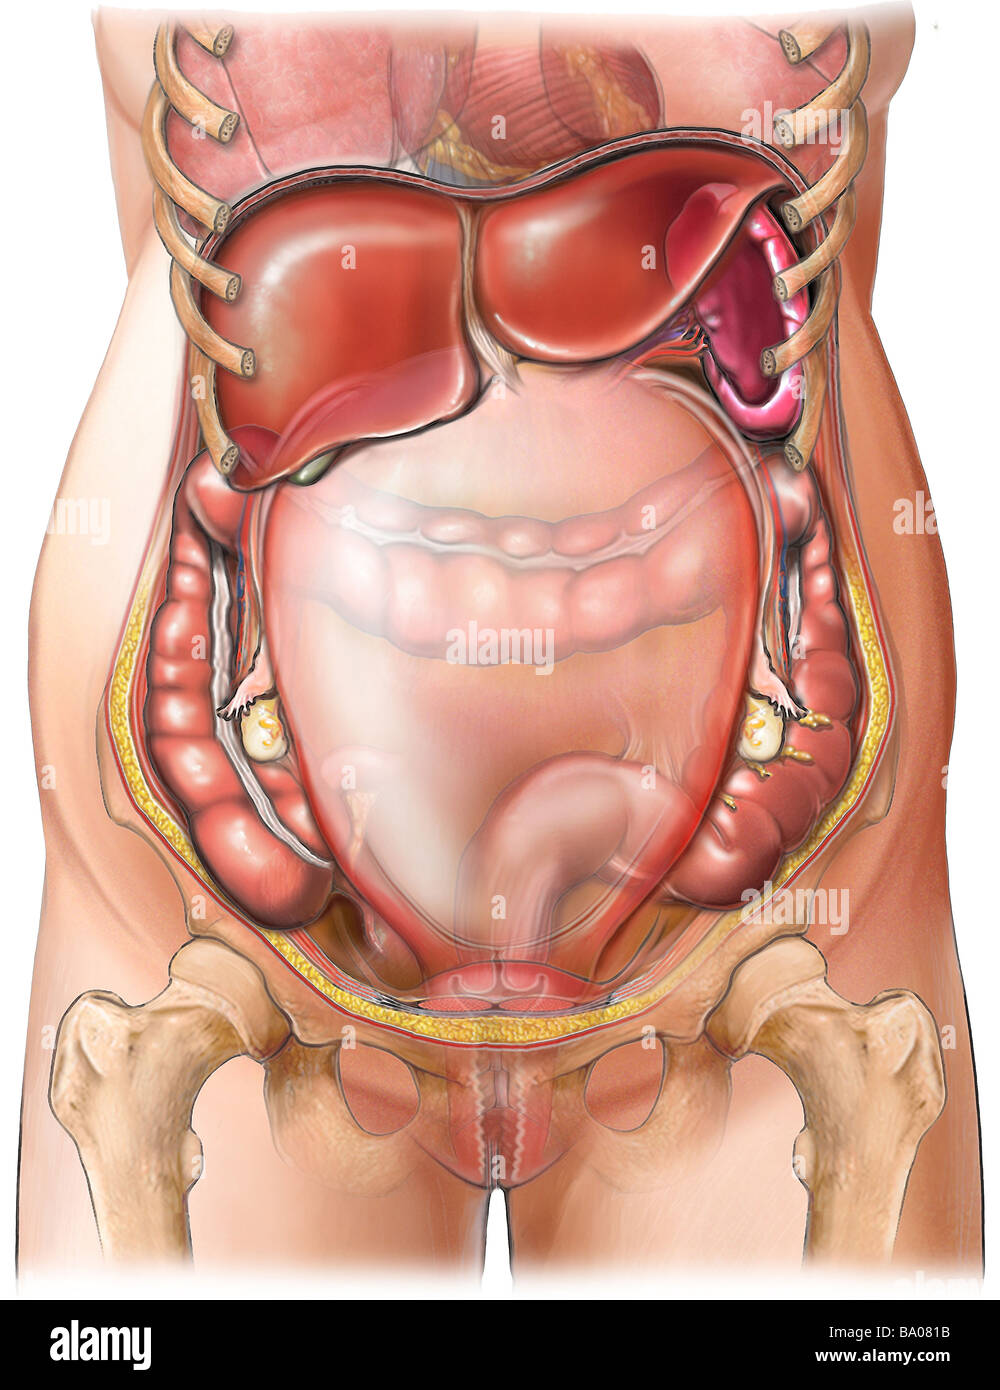 This medical illustration depicts the anatomy of an adult female 22 weeks pregnant. Her internal organs are included. Stock Photo